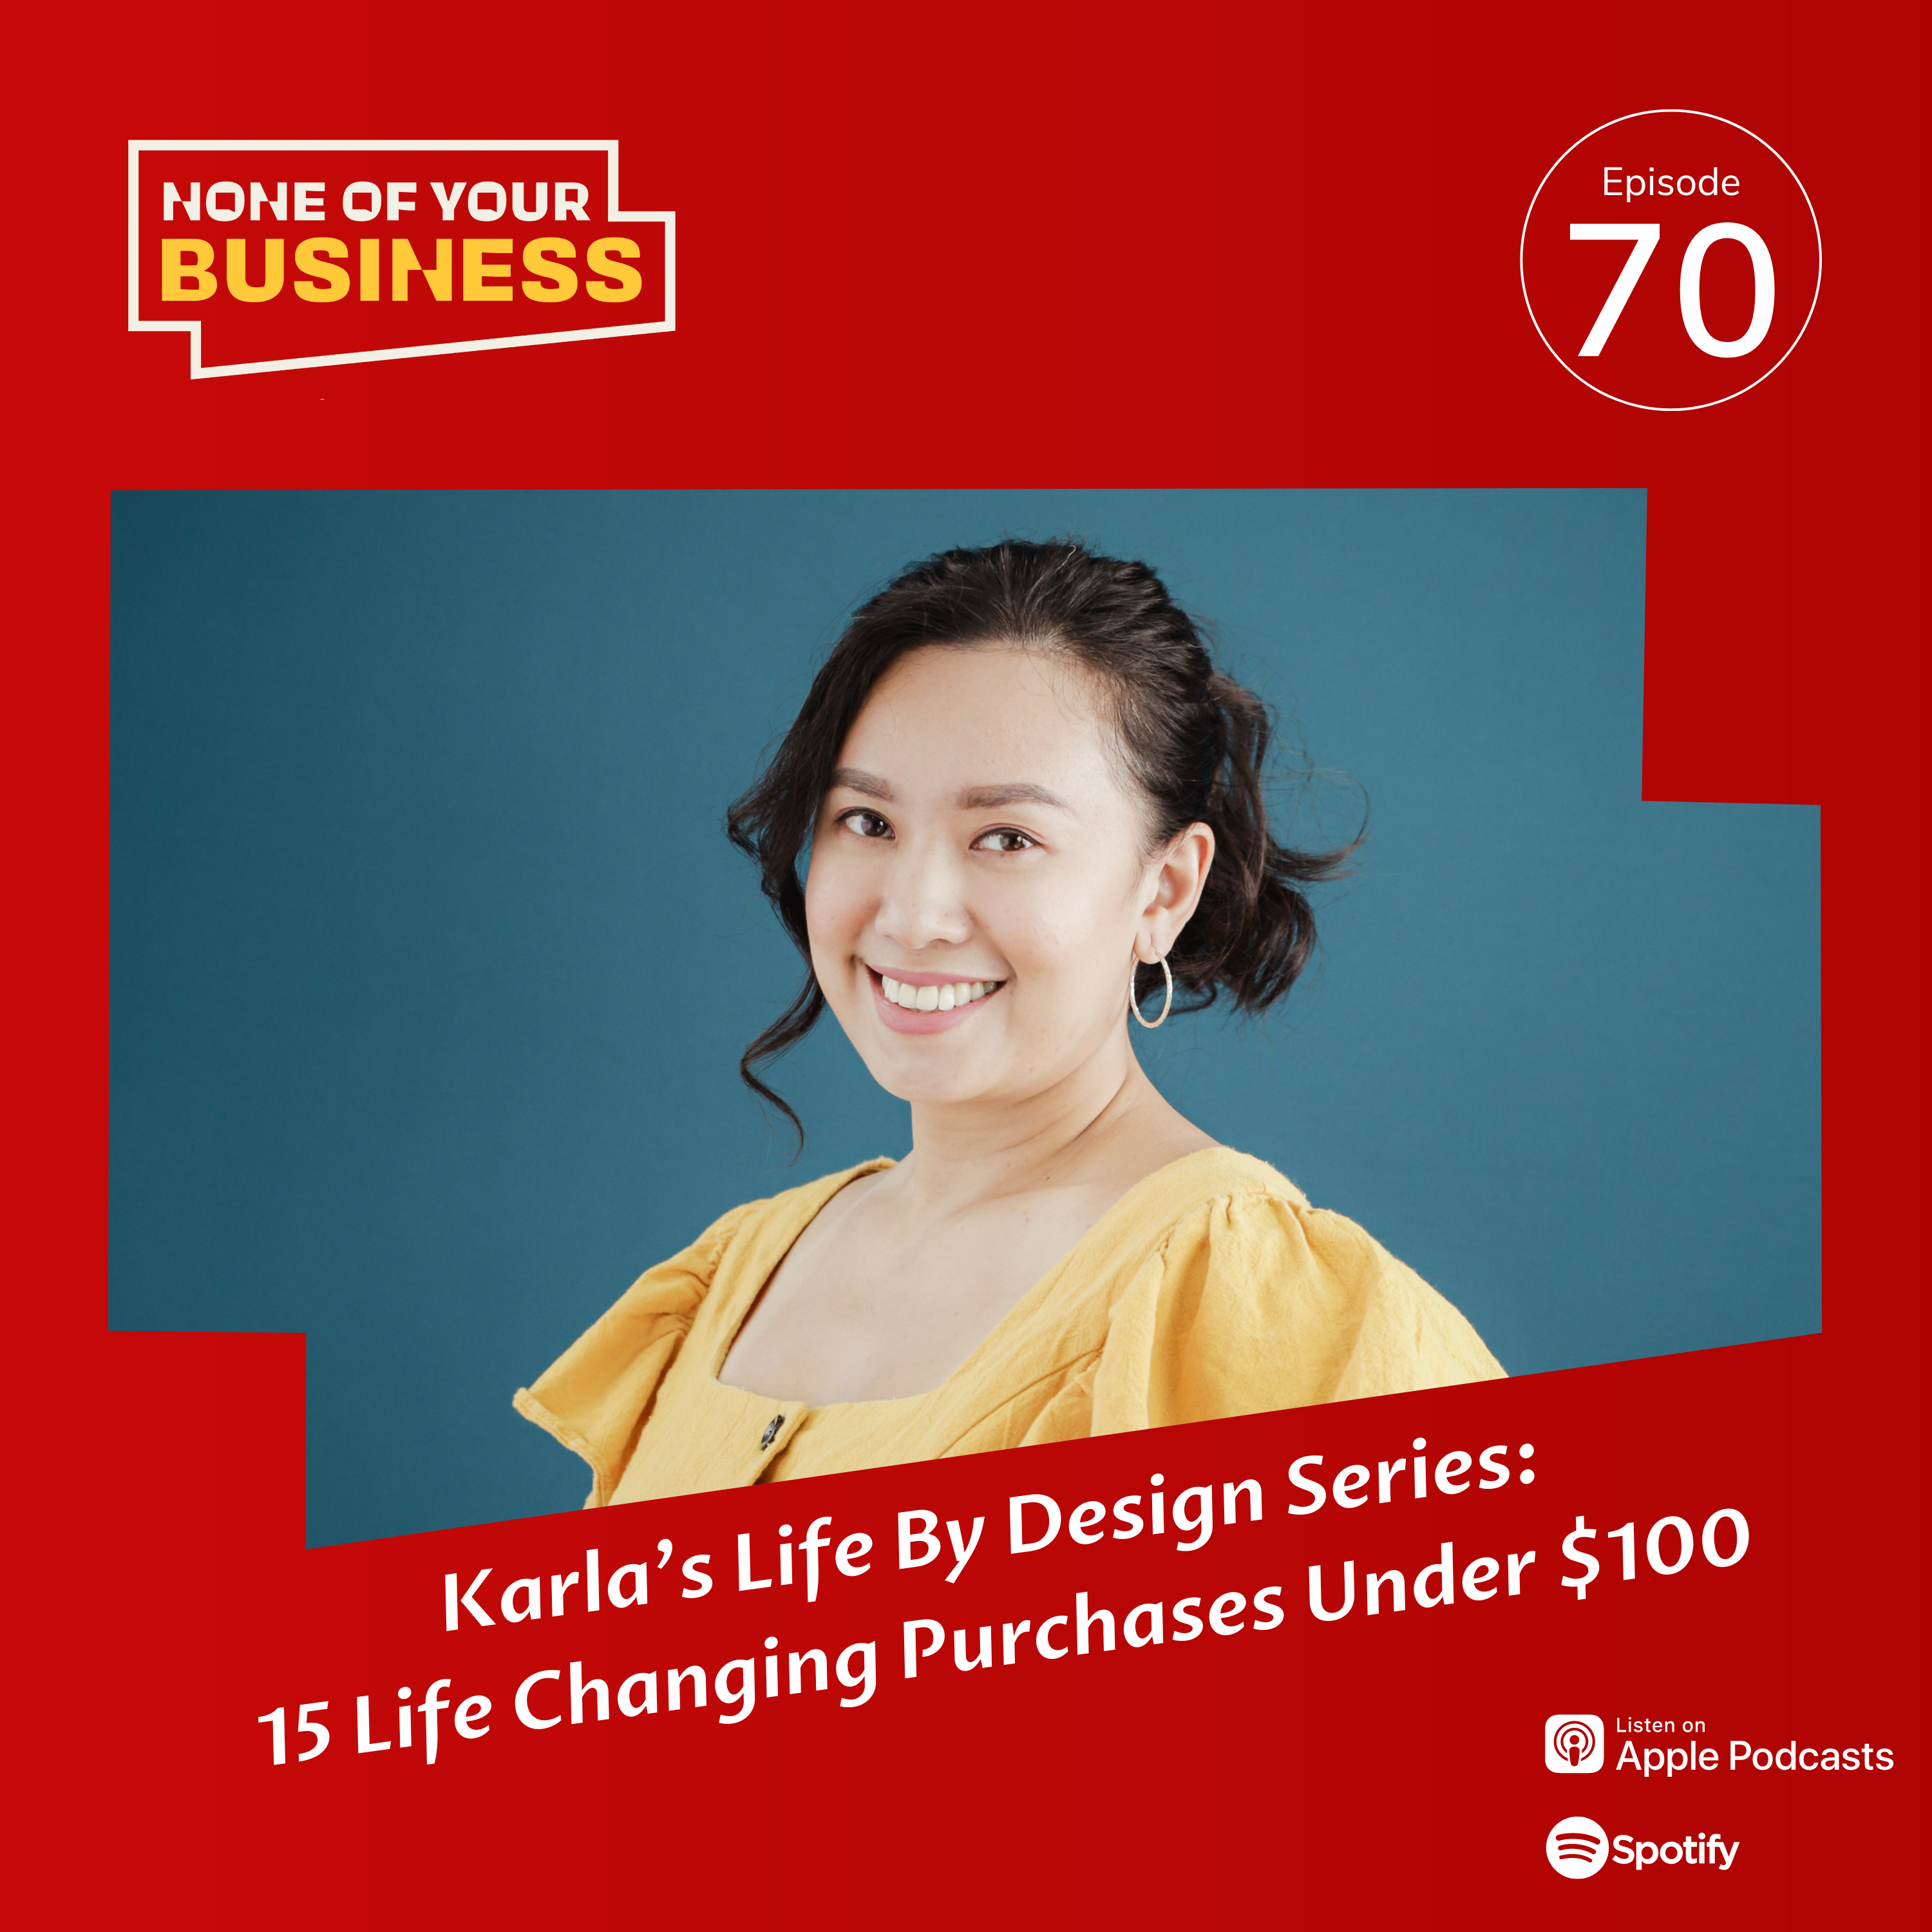 Karla's Life By Design Series: 15 Life Changing Purchases Under $100